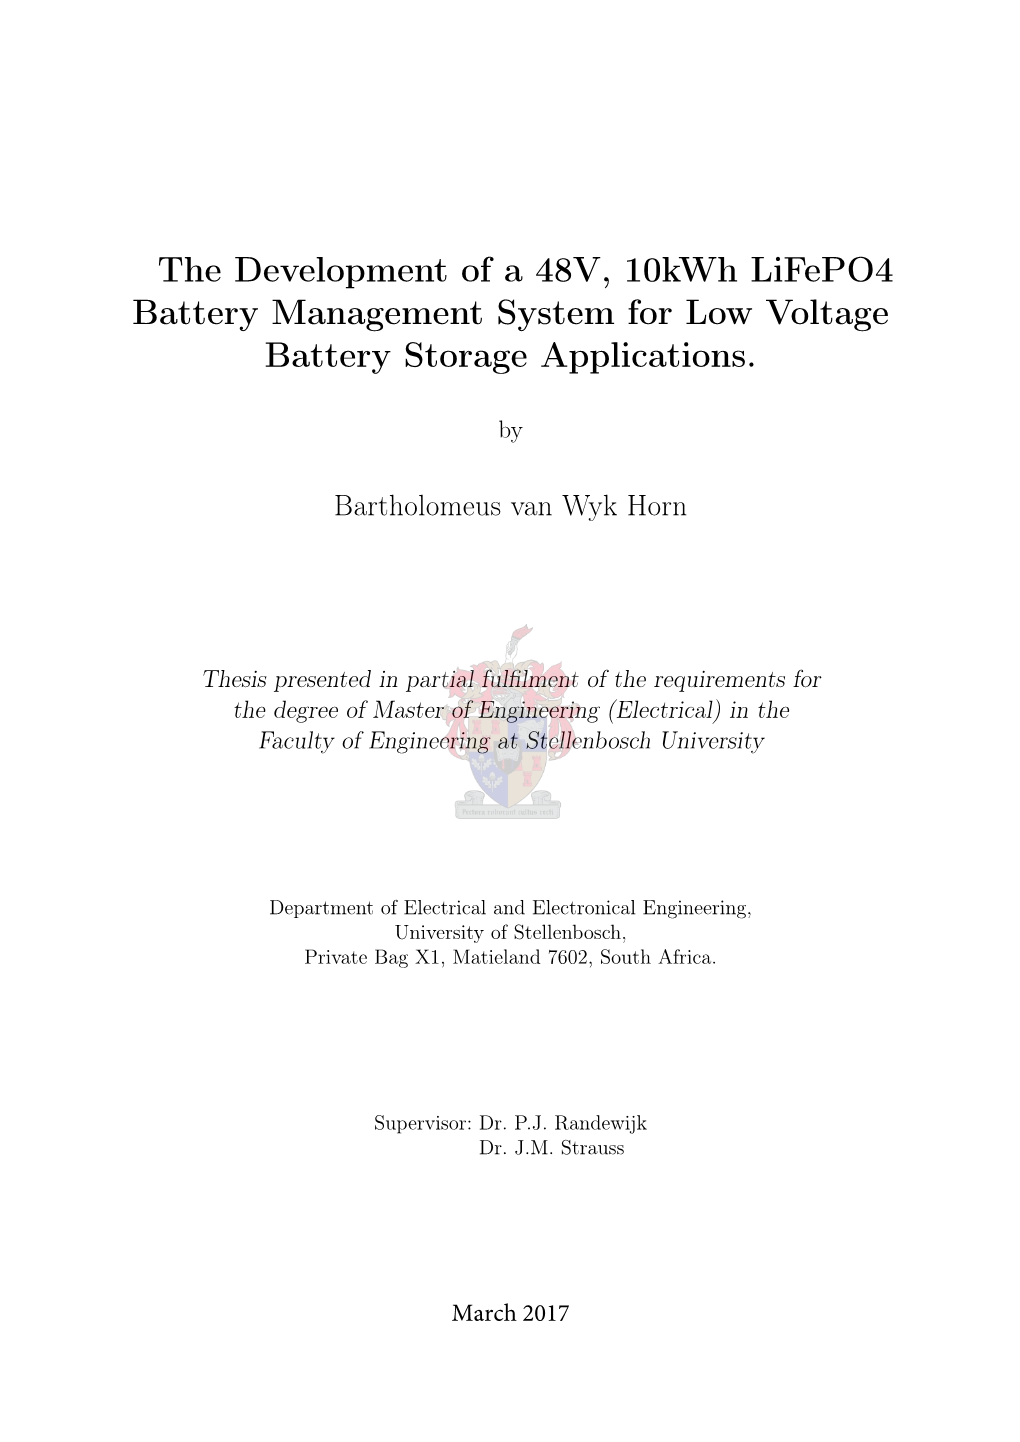 The Development of a 48V, 10Kwh Lifepo4 Battery Management System for Low Voltage Battery Storage Applications